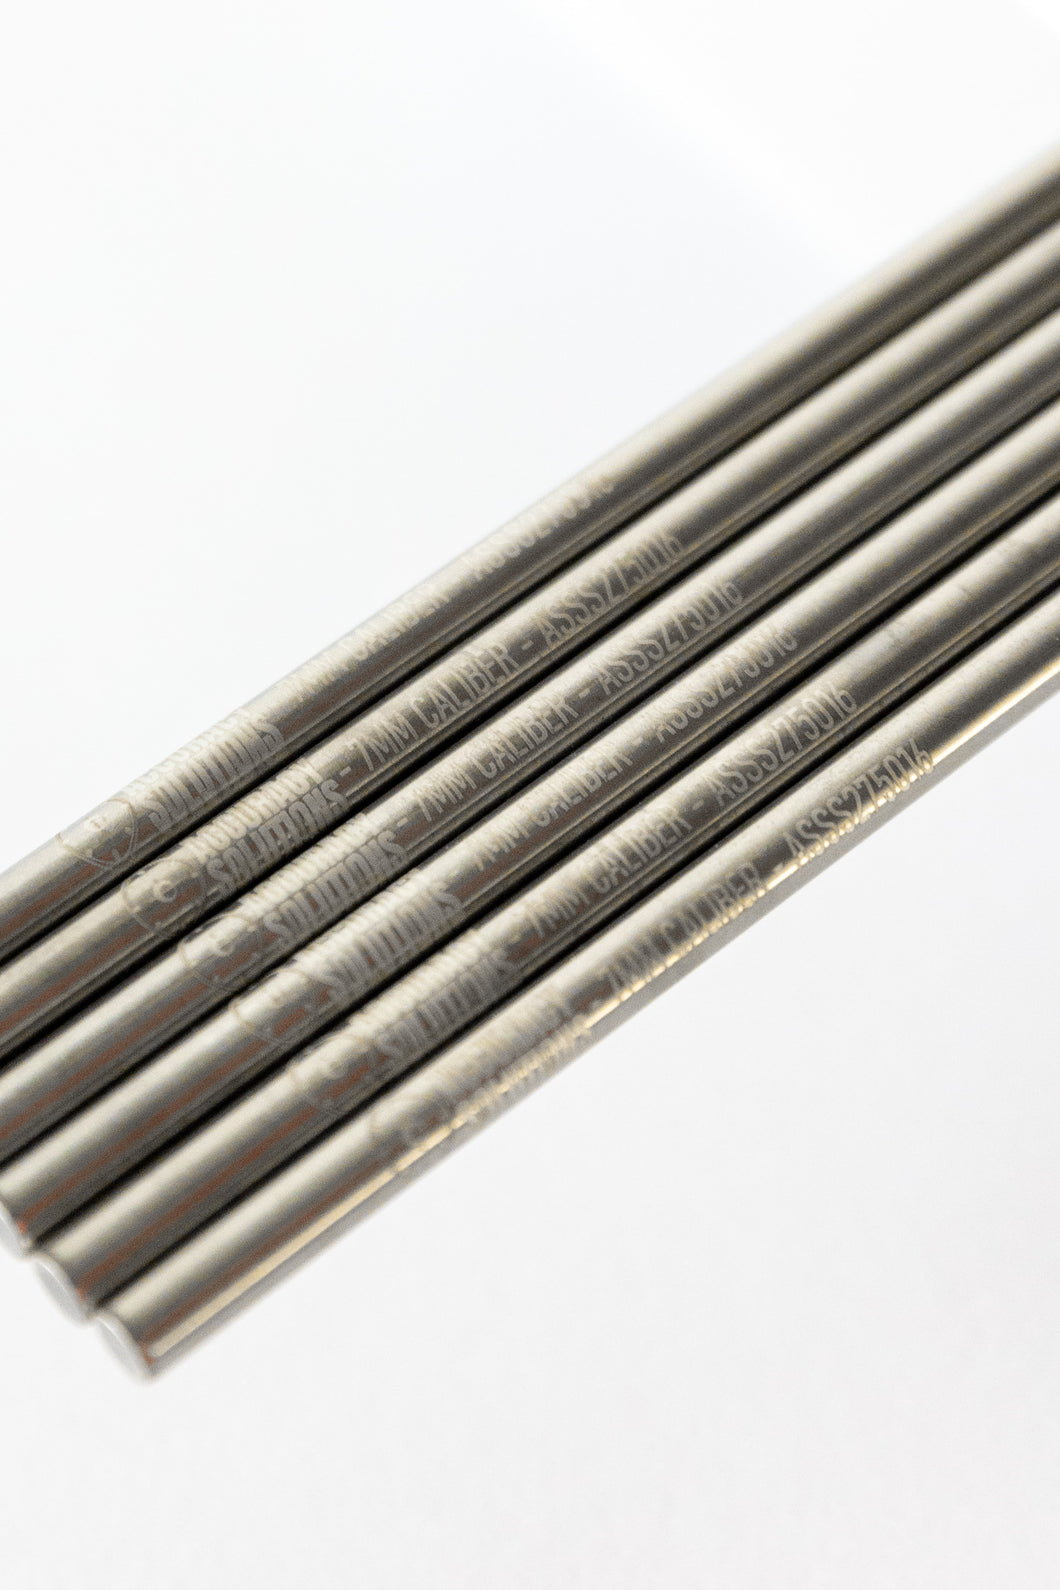 7MM Stainless Steel Bore Alignment Rod